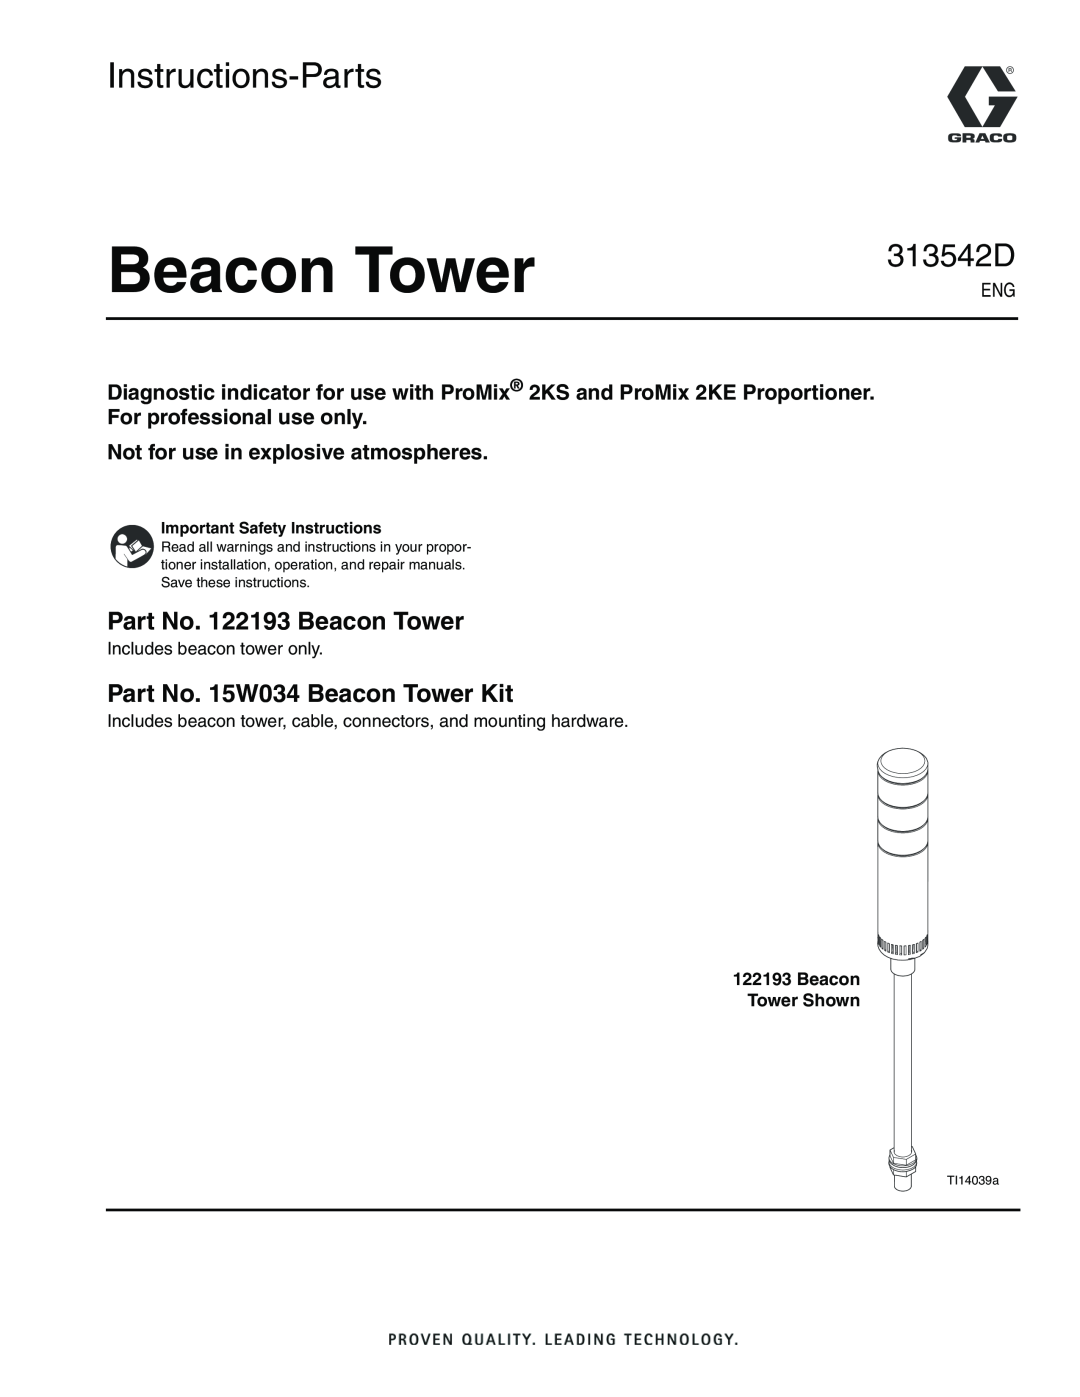 Graco 122193 important safety instructions Not for use in explosive atmospheres, Beacon Tower Shown, Instructions-Parts 